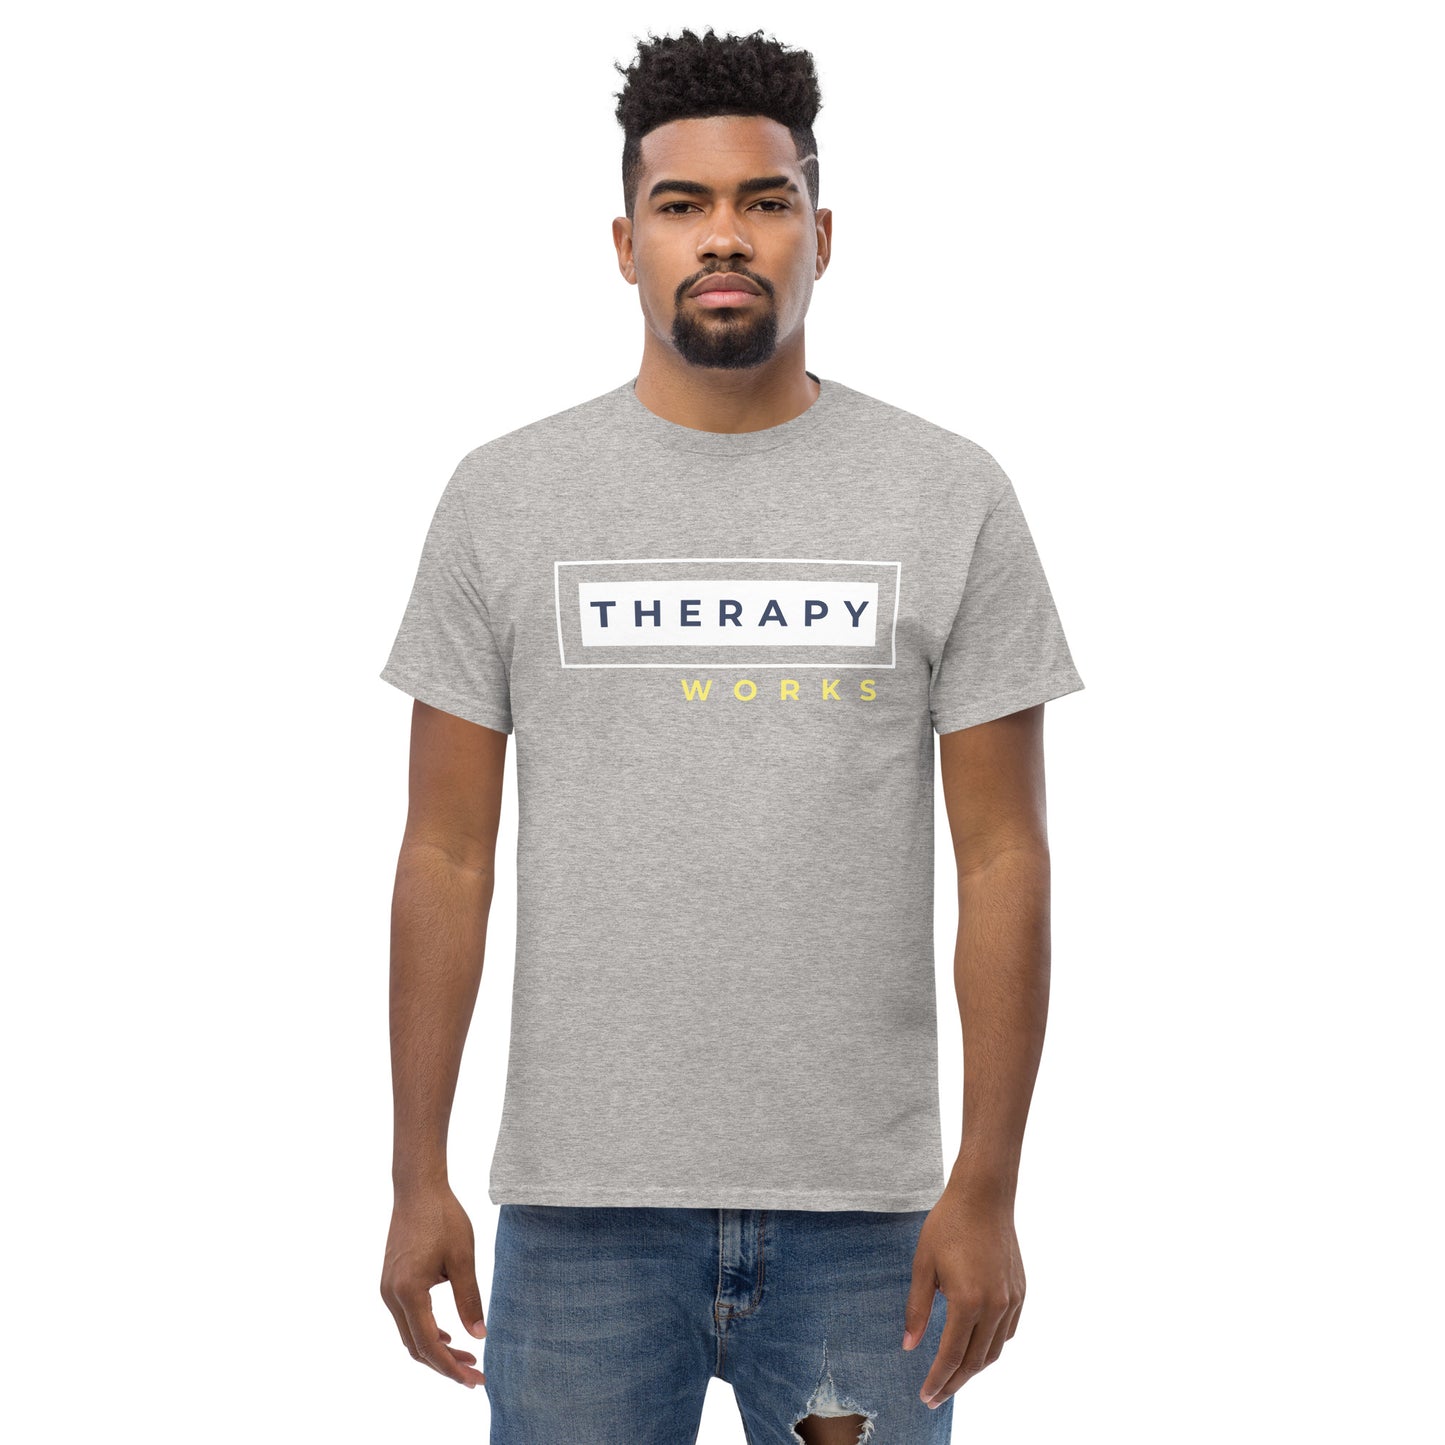 Therapy Works Tee